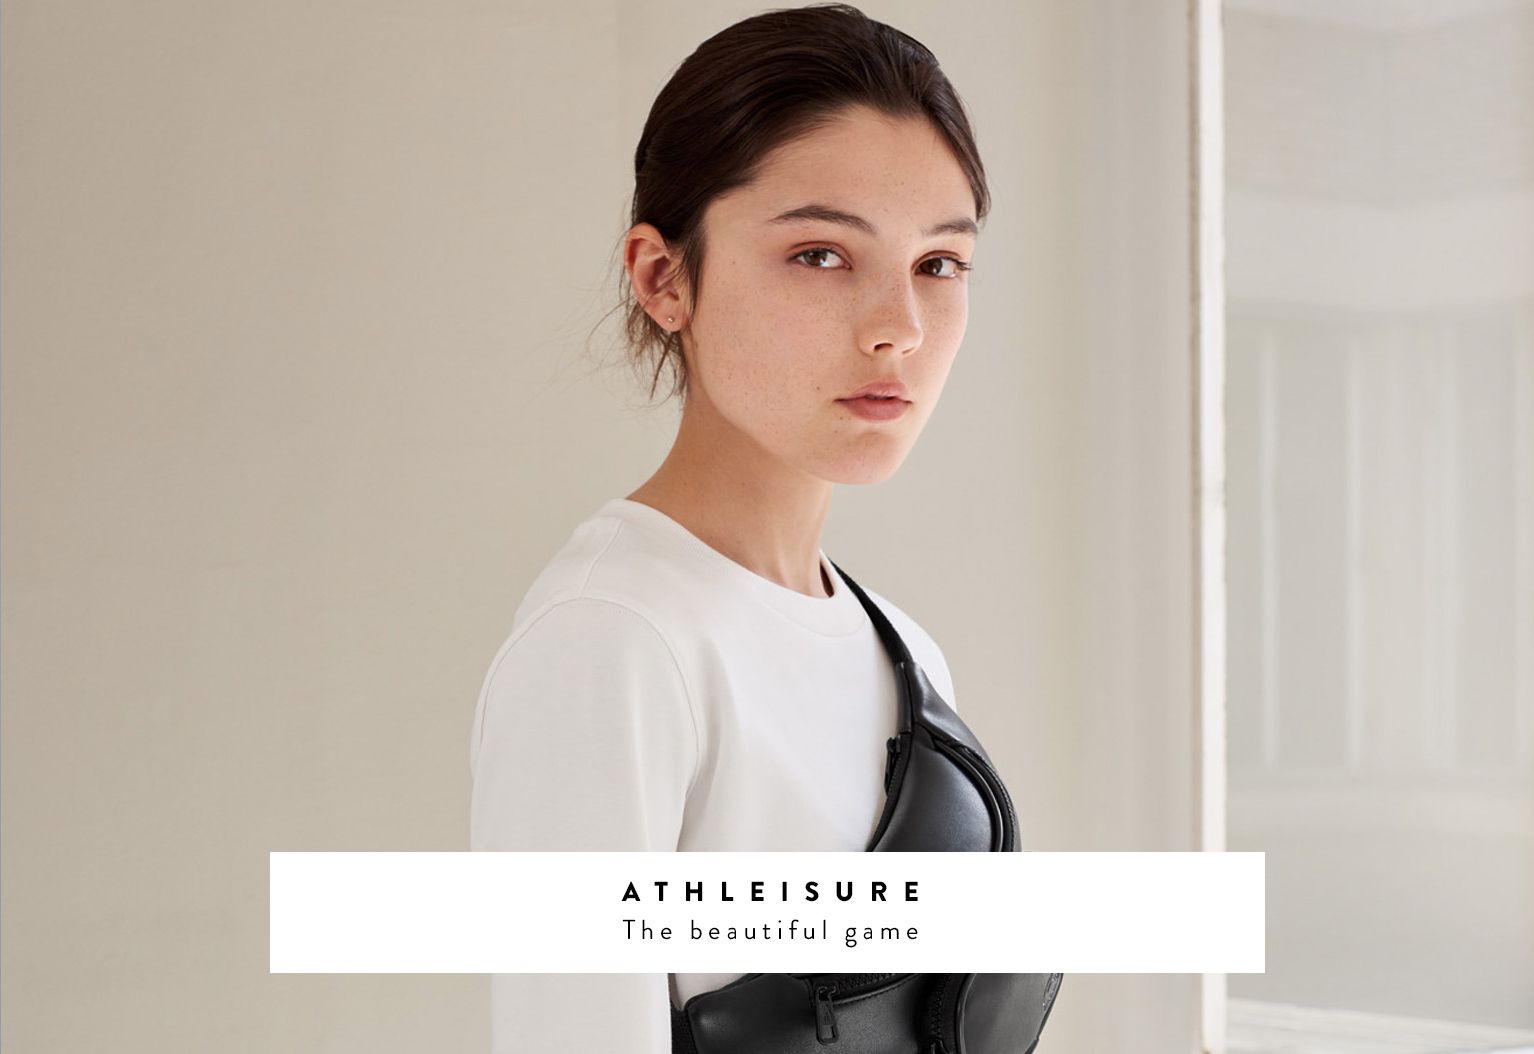 Athleisure – the beautiful game